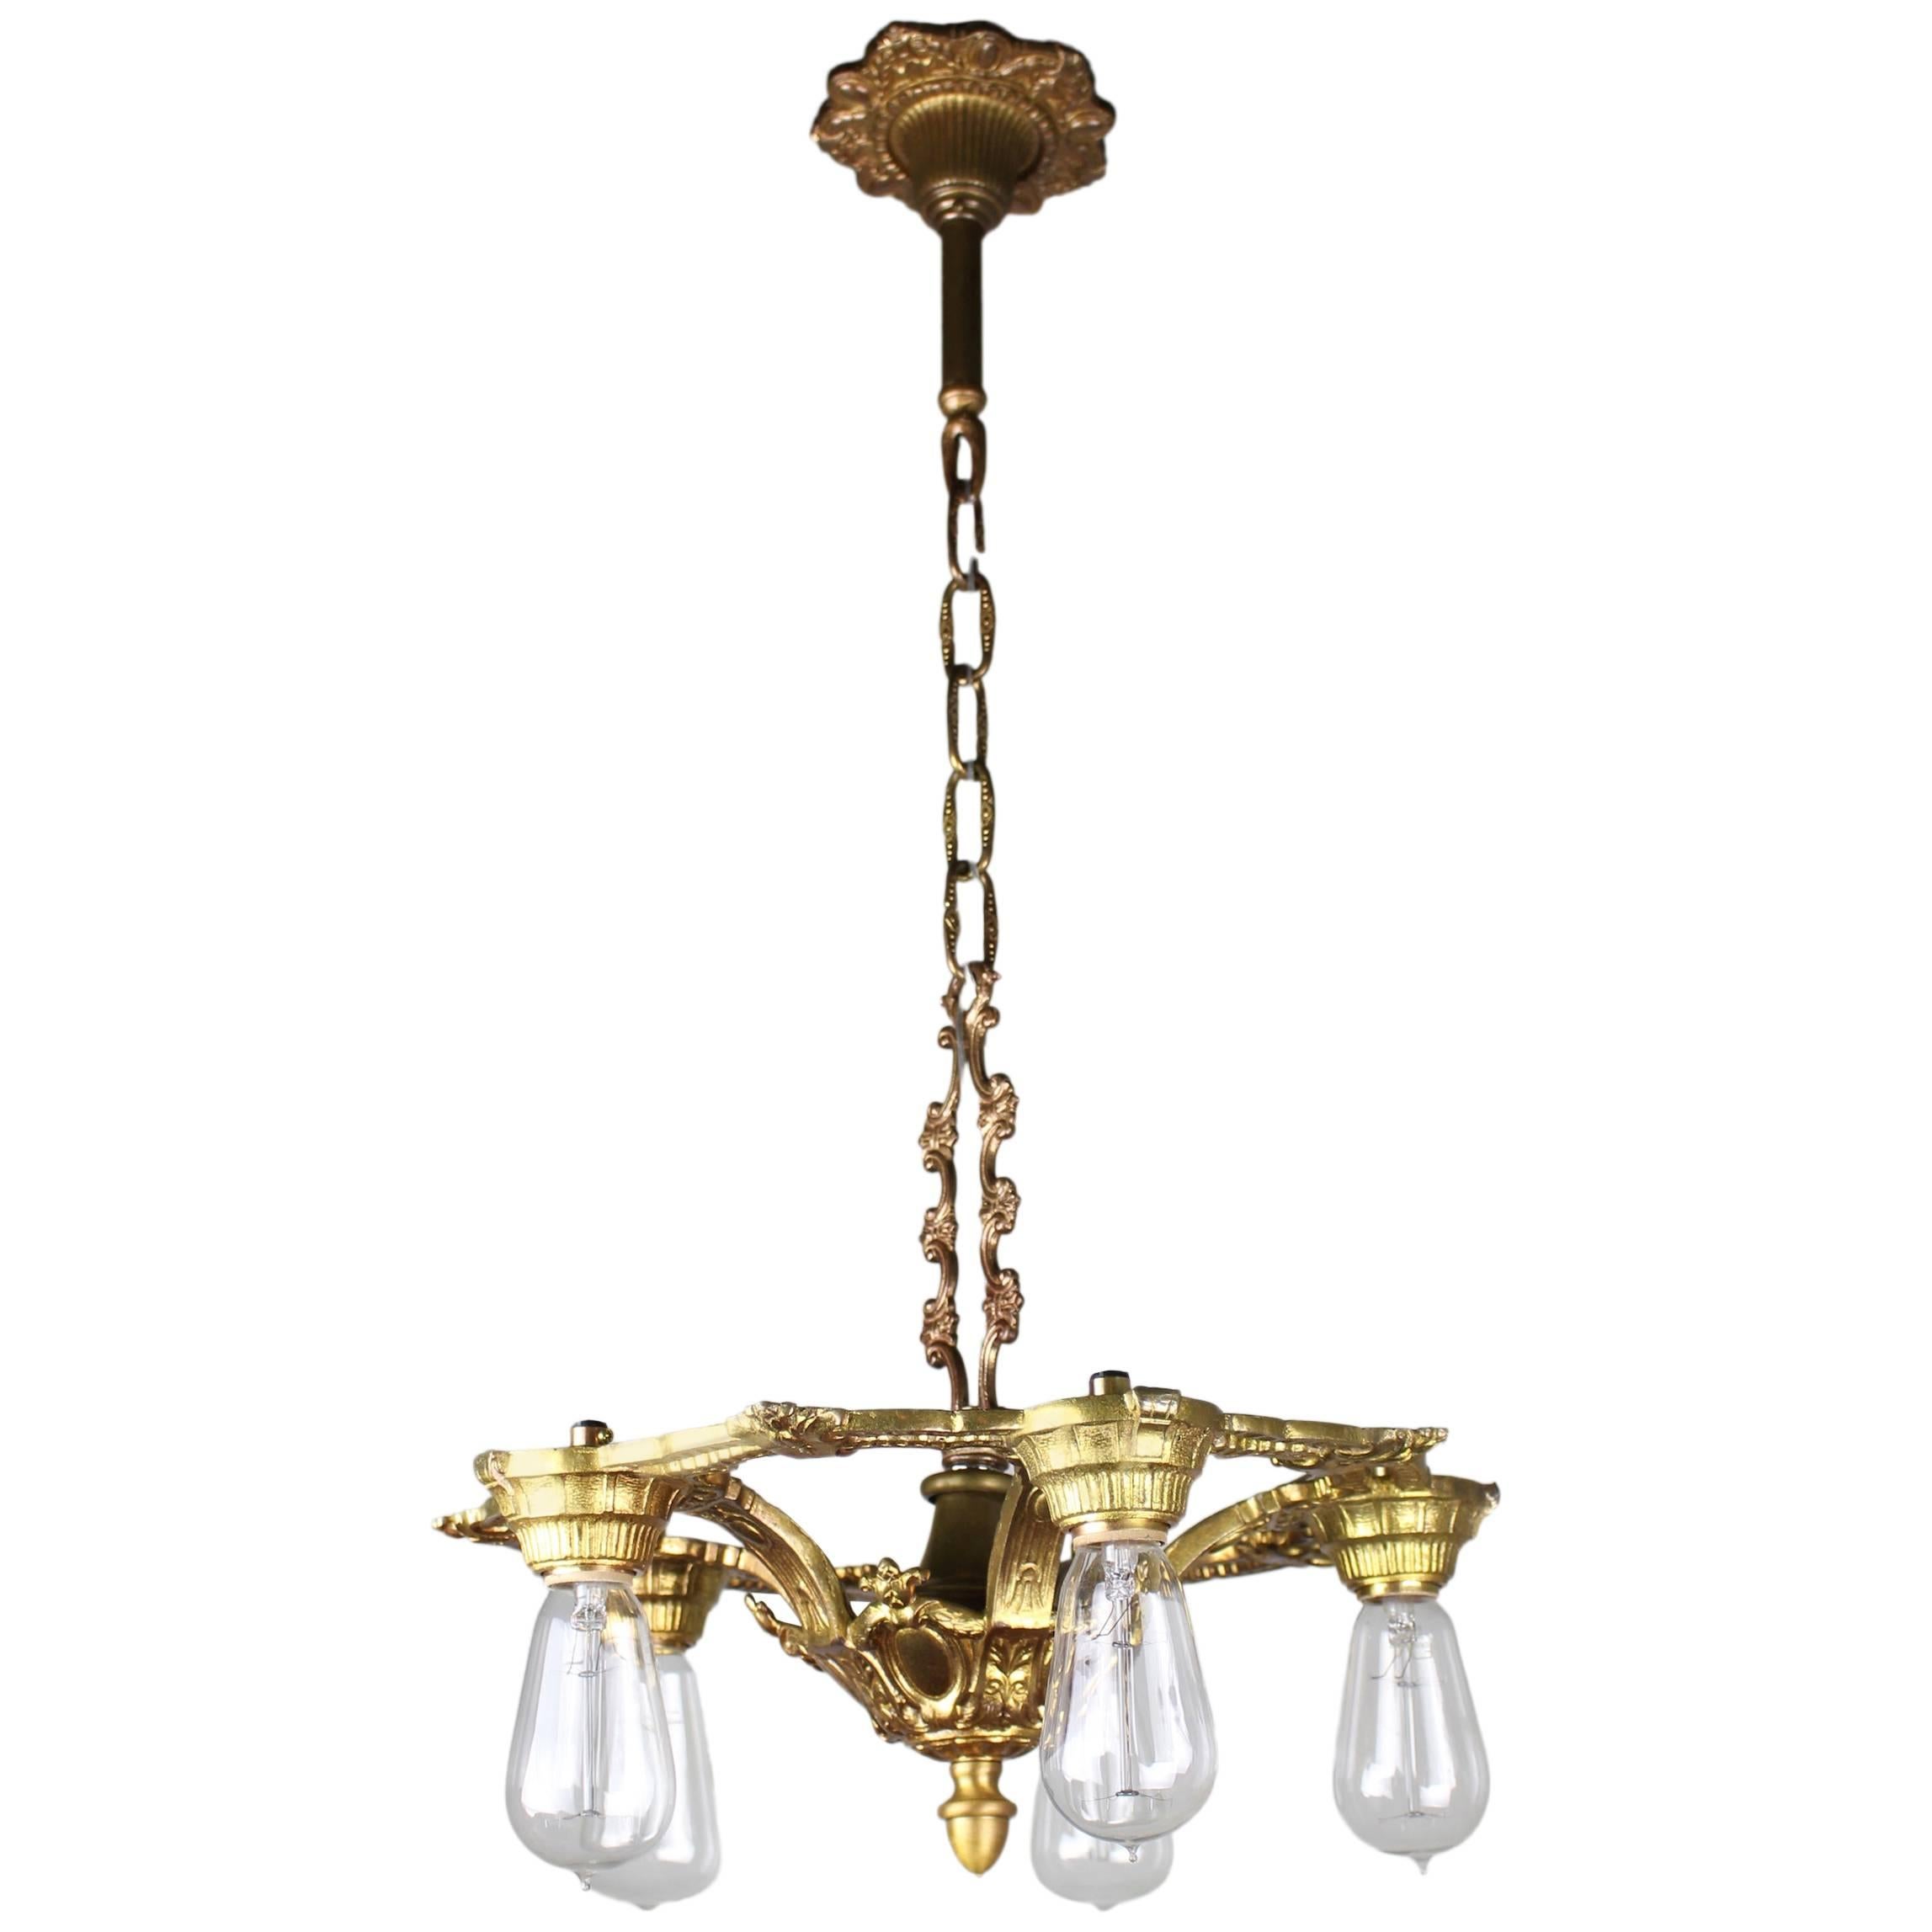 1920s Cast Brass Fixture in the Neoclassical Style